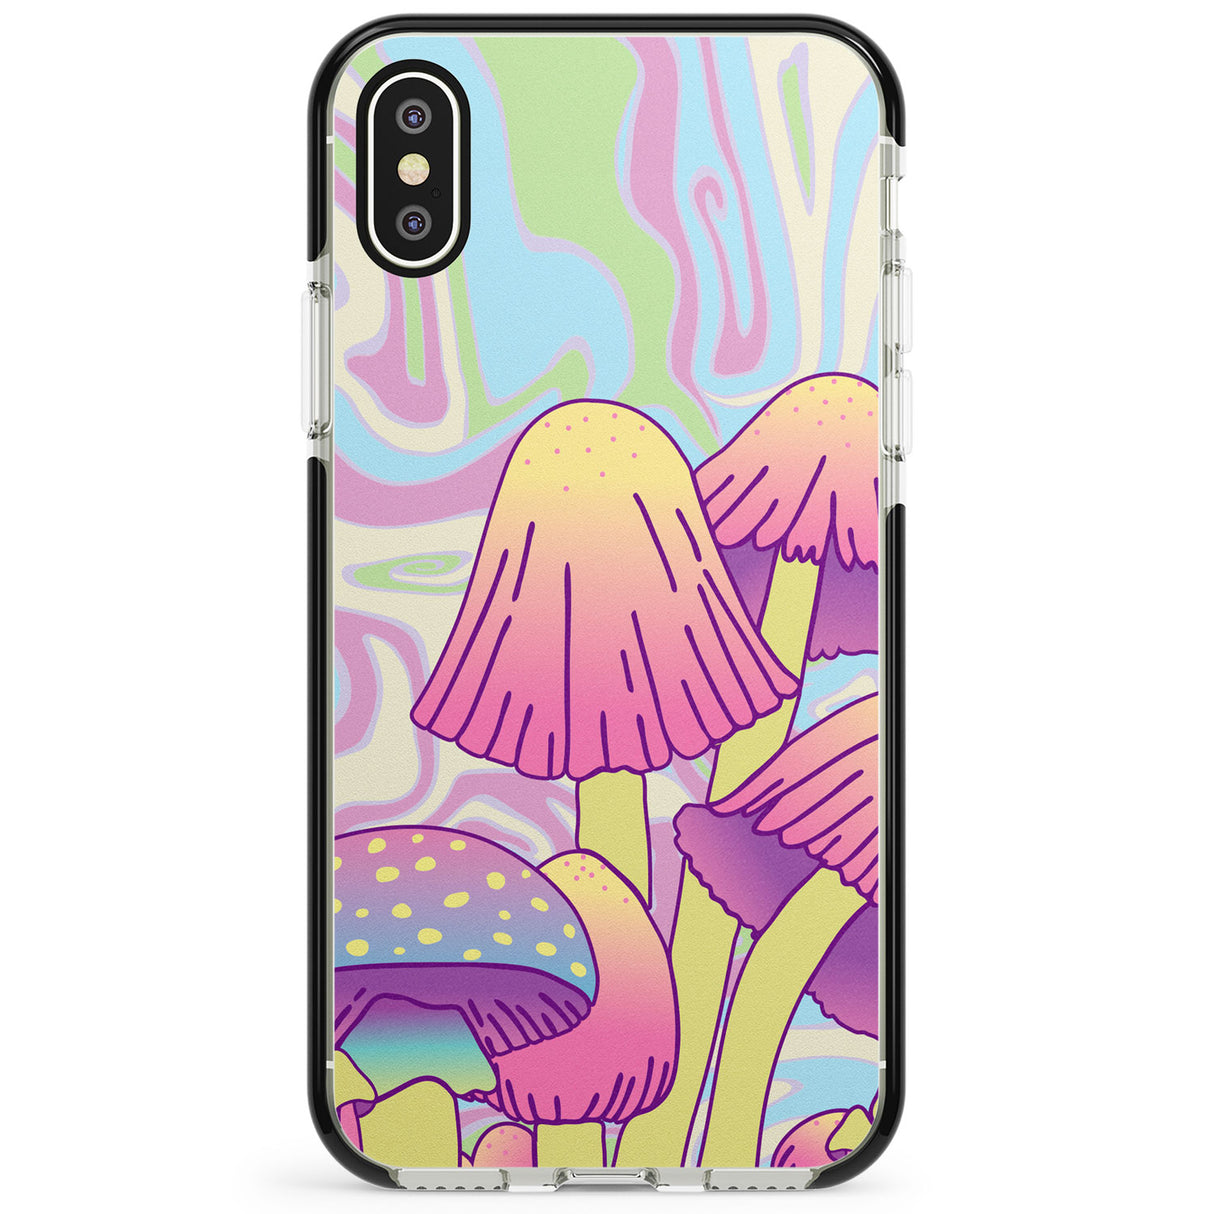 Shroomin' Phone Case for iPhone X XS Max XR